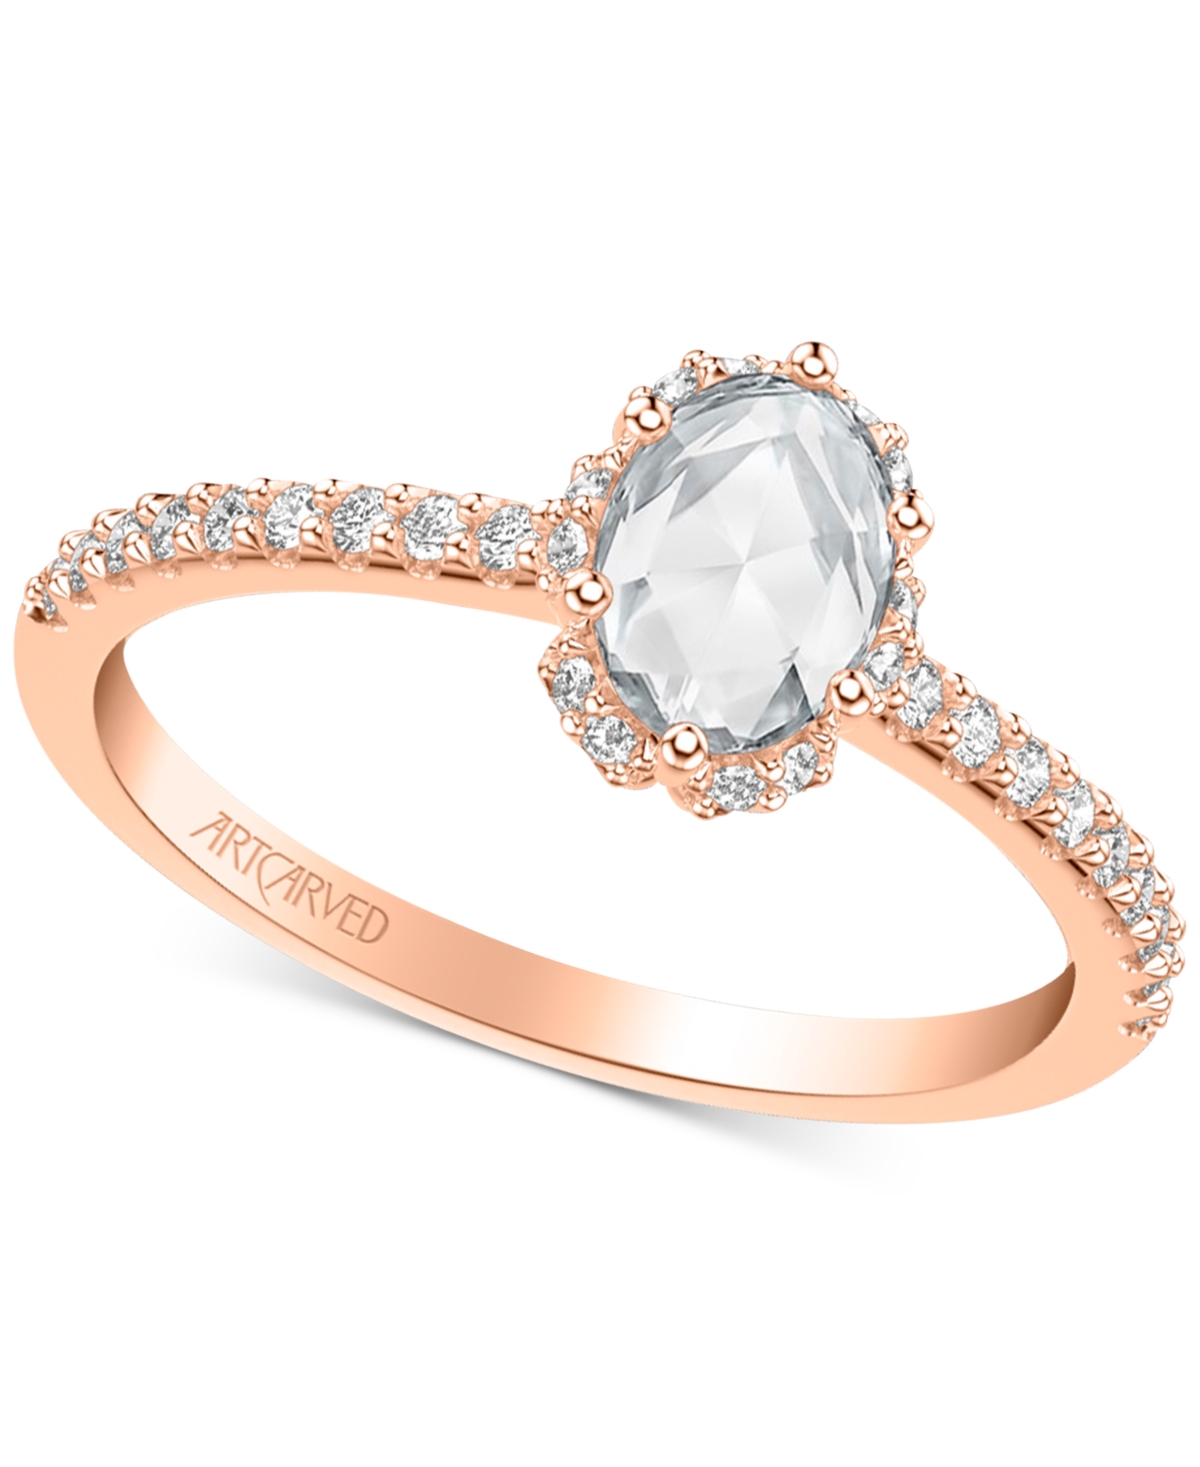 Artcarved Art Carved Diamond Rose-Cut Halo Engagement Ring (5/8 ct. t.w.) in 14k White, Yellow or Rose Gold